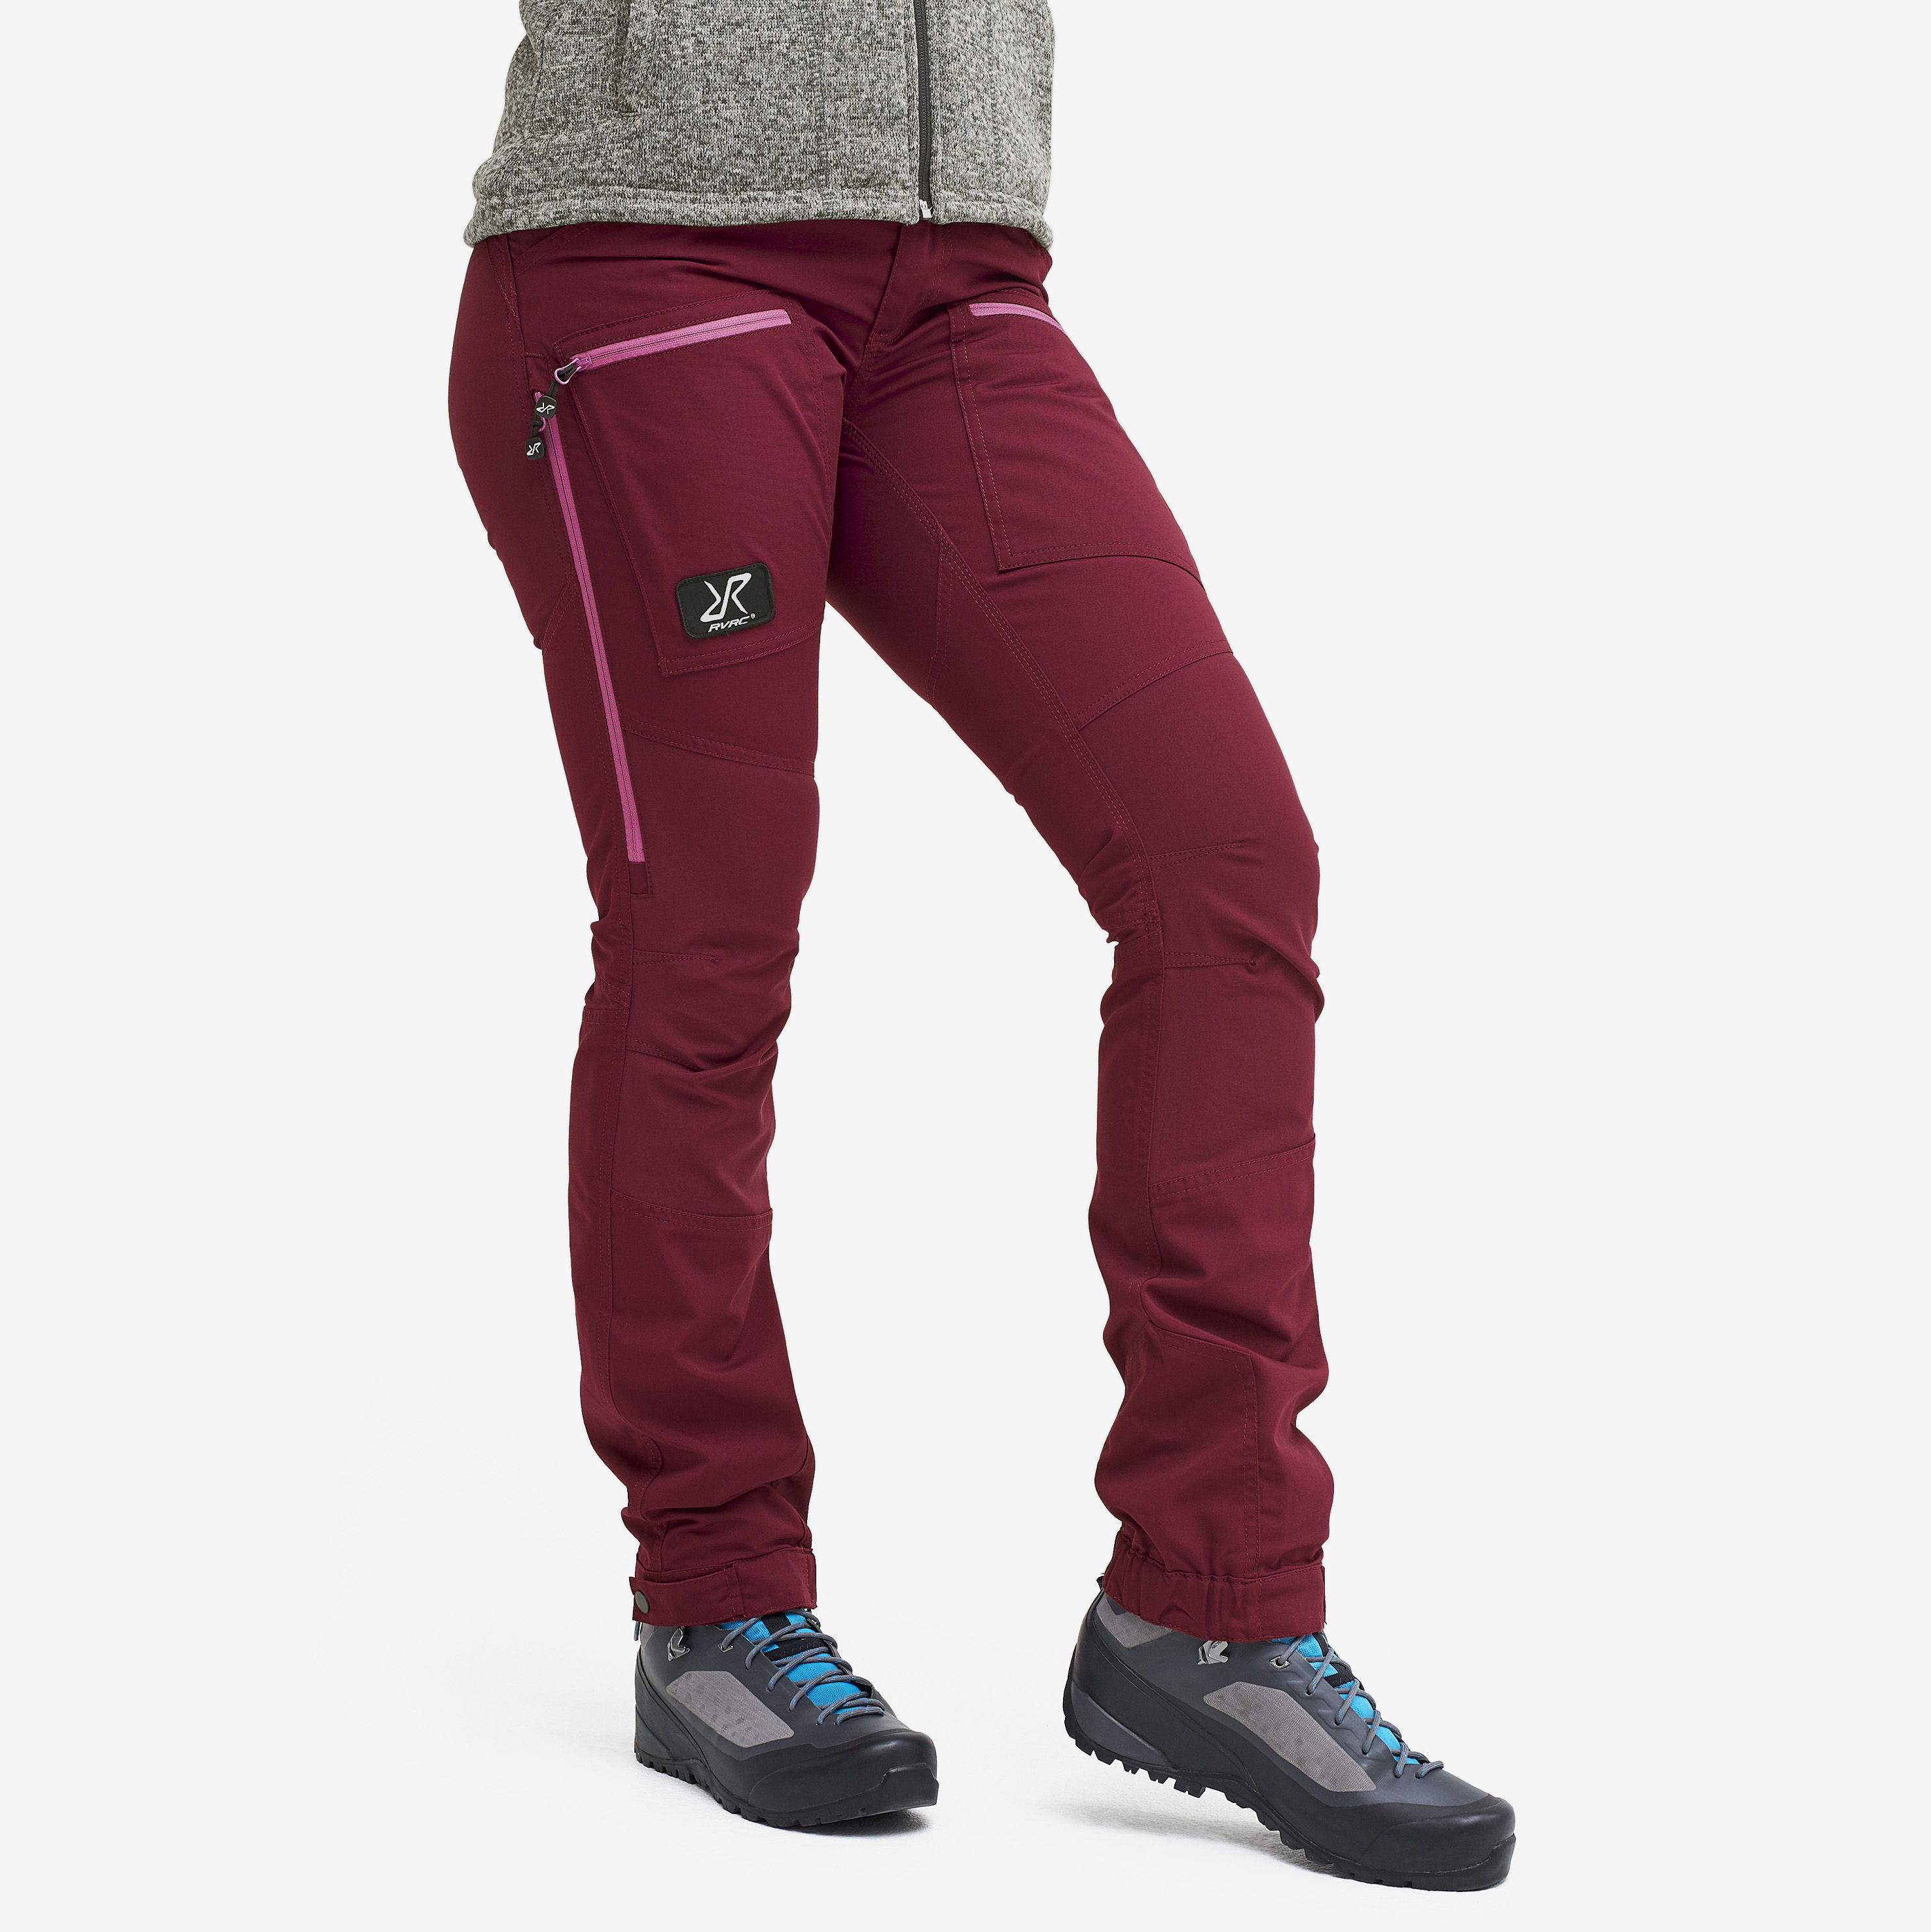 Nordwand Pro Pants Bison Red Dame